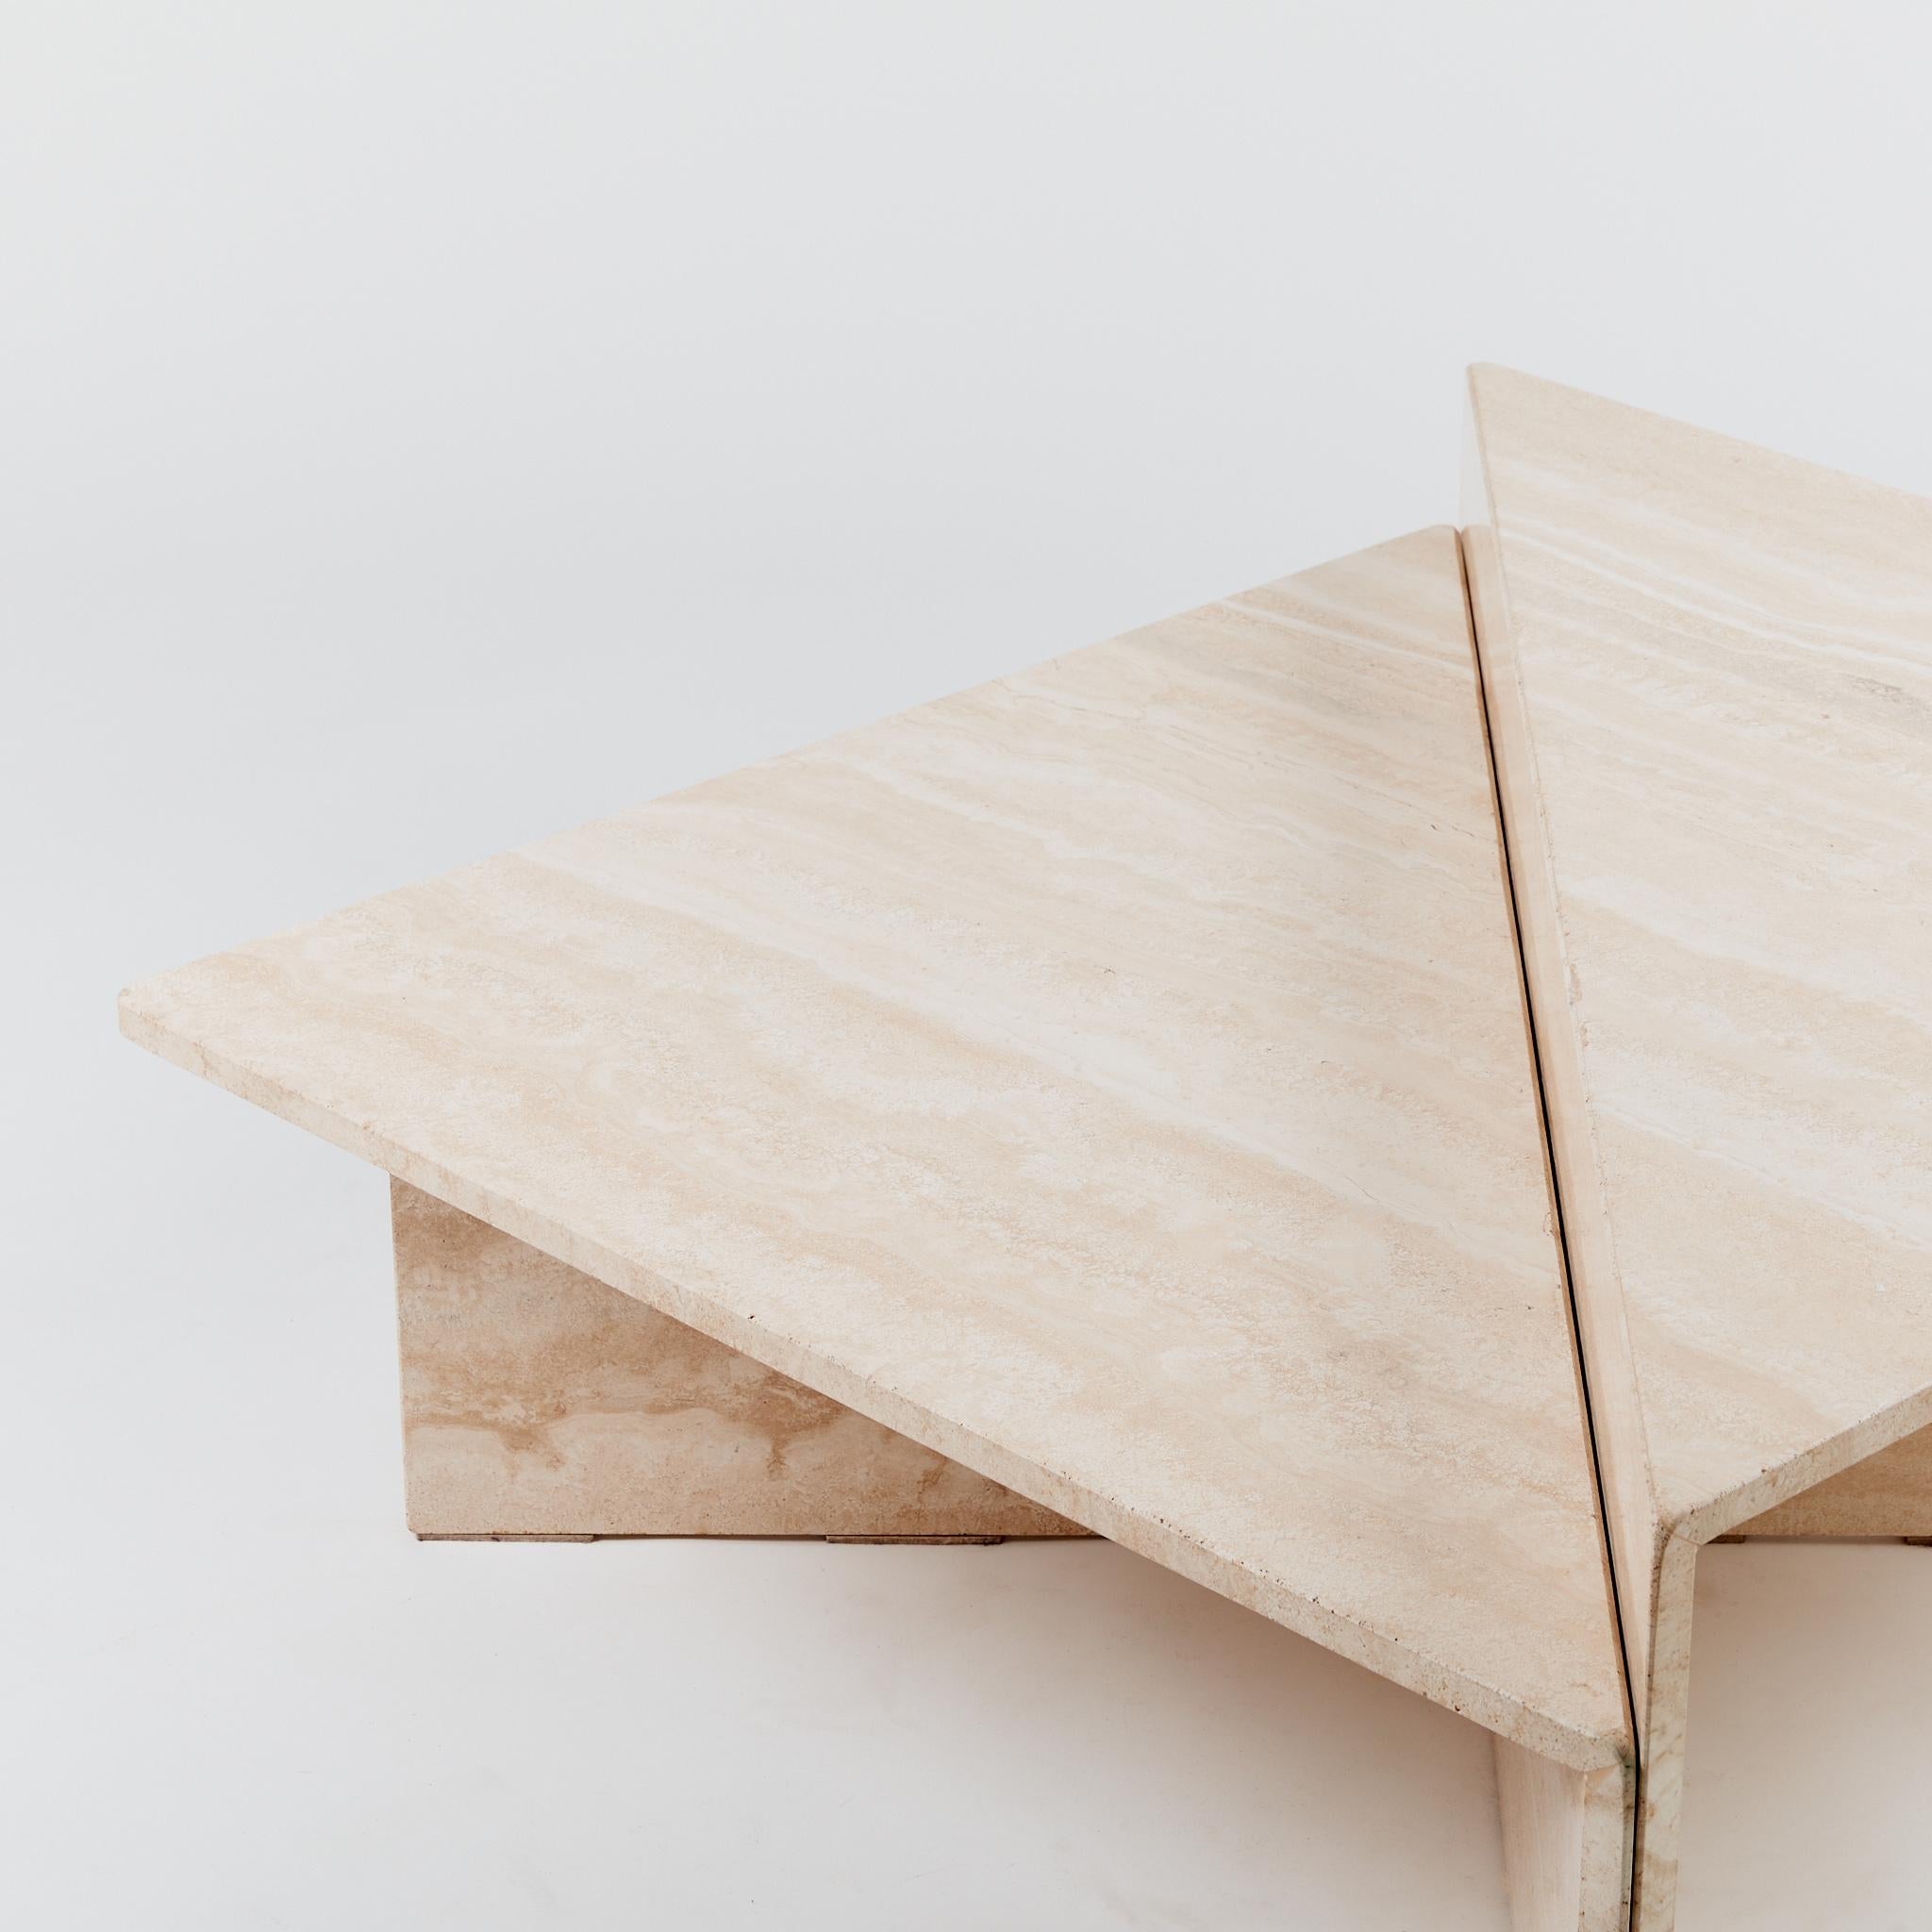 Statement Triangular Marble Coffee Tables 1